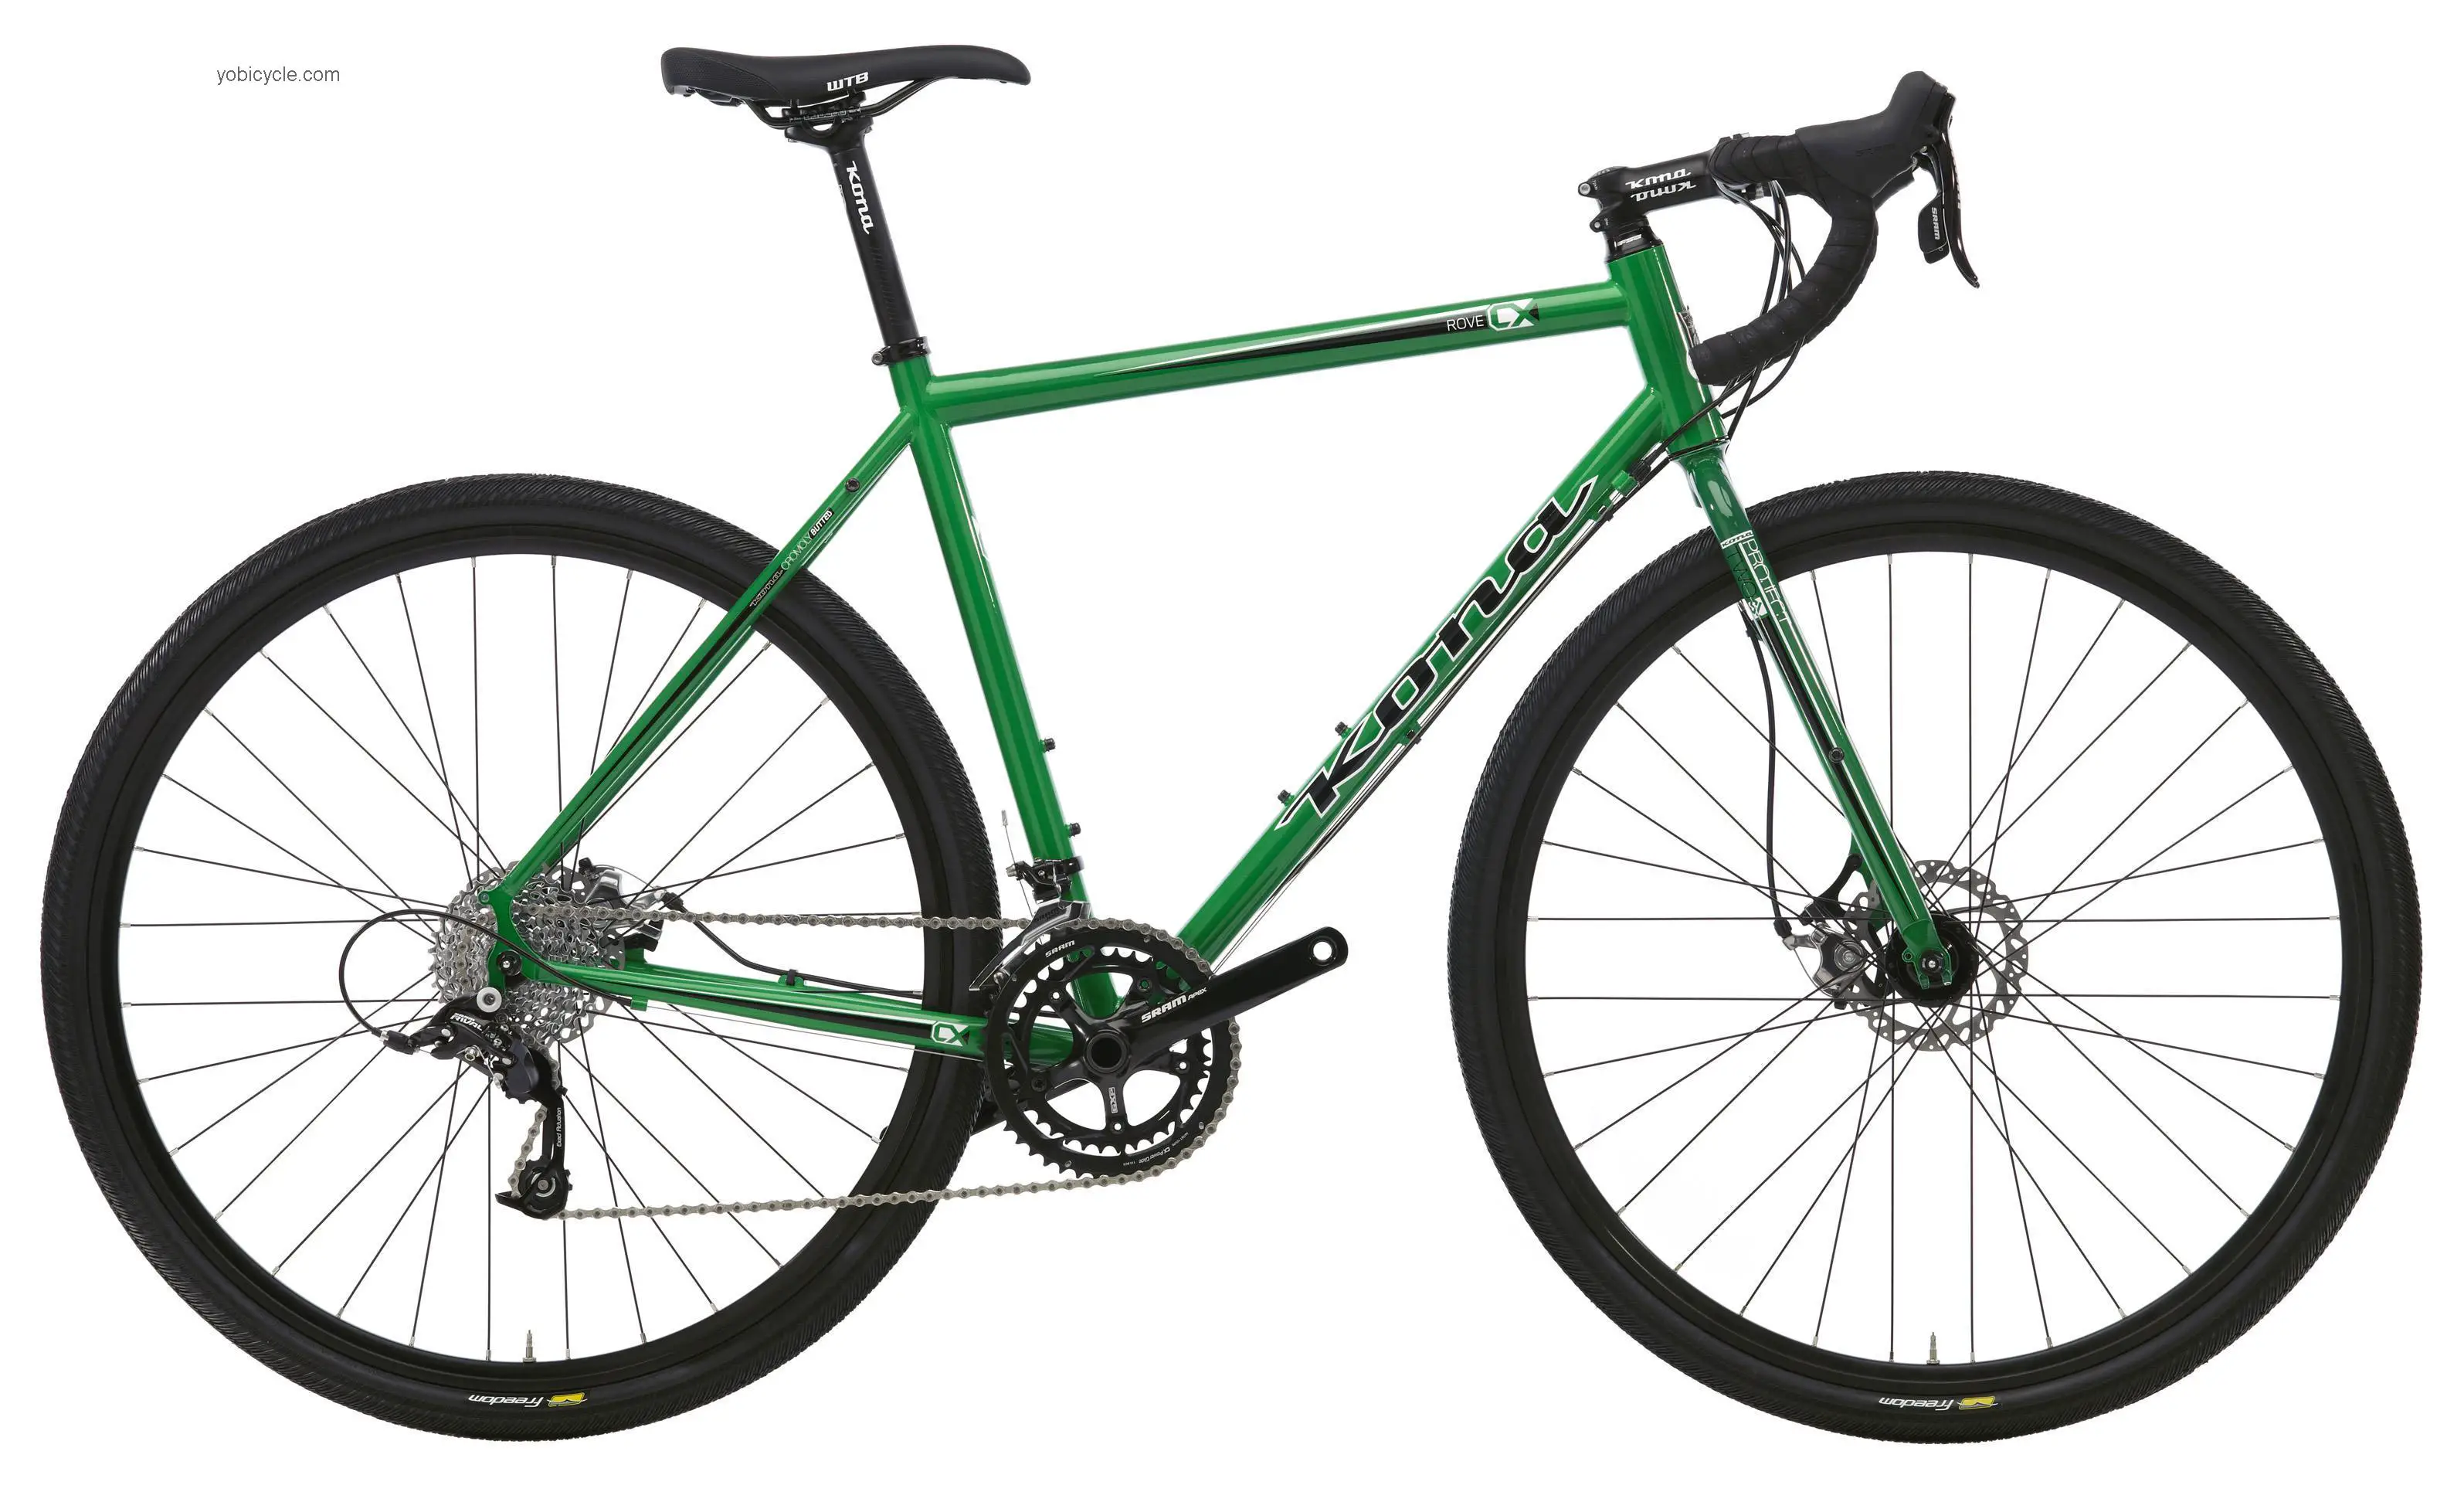 Kona Rove competitors and comparison tool online specs and performance